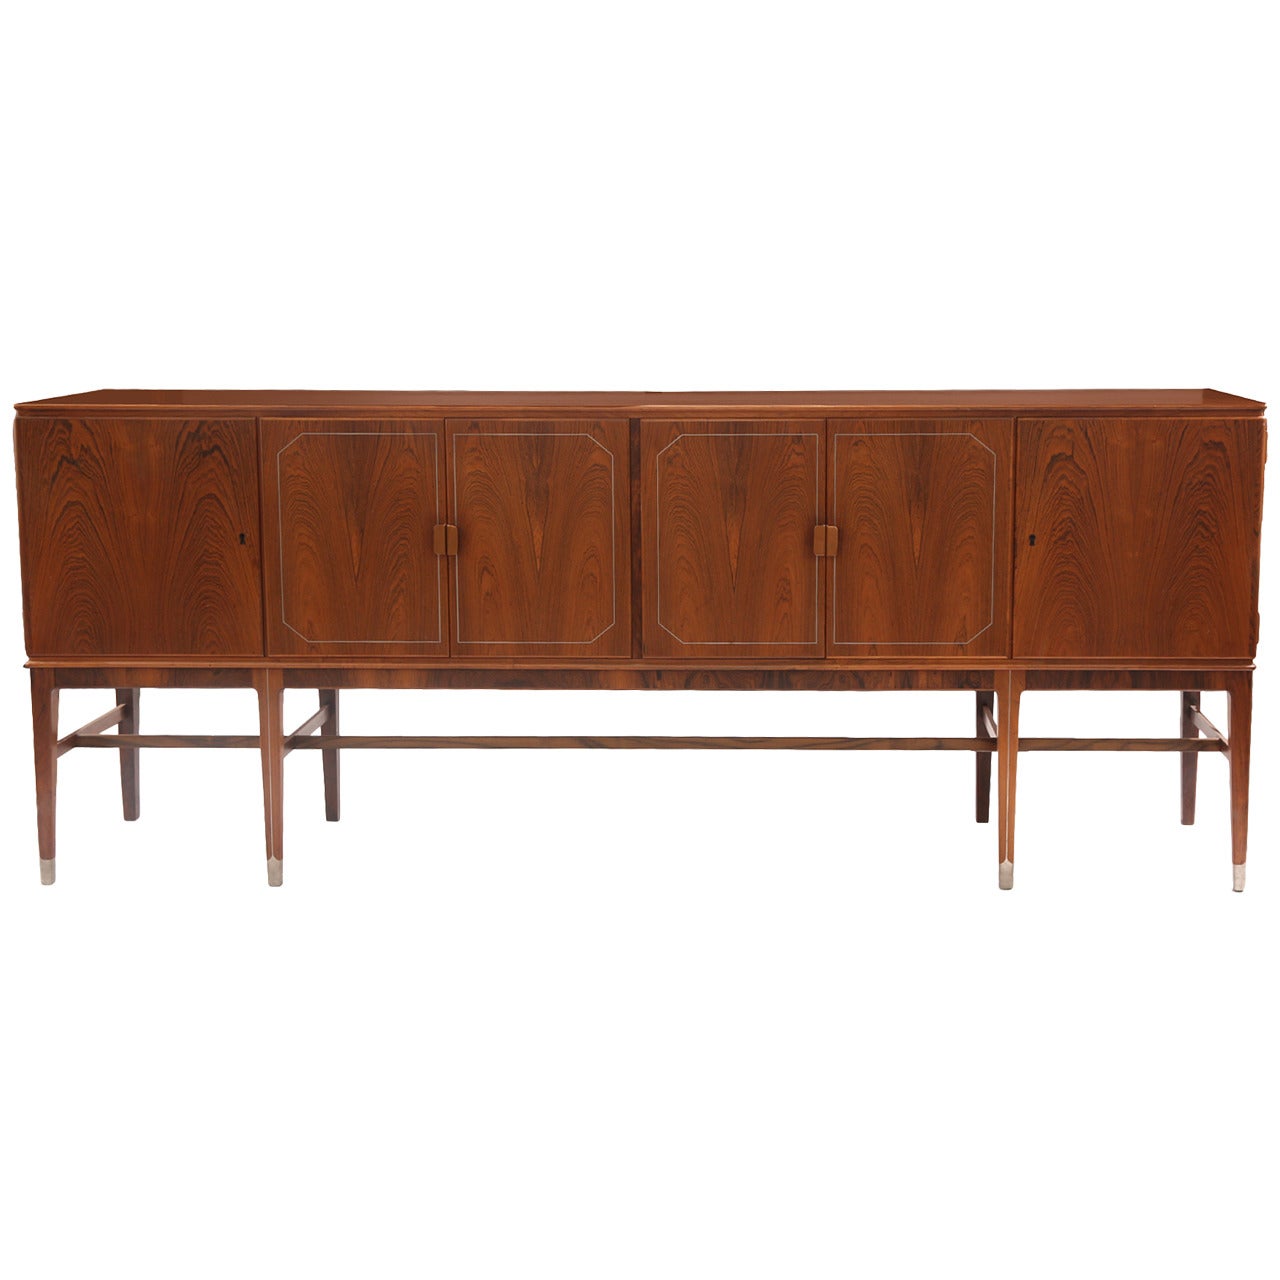 Rare Rosewood Pewter and Copper Credenza by Georg Kofoed